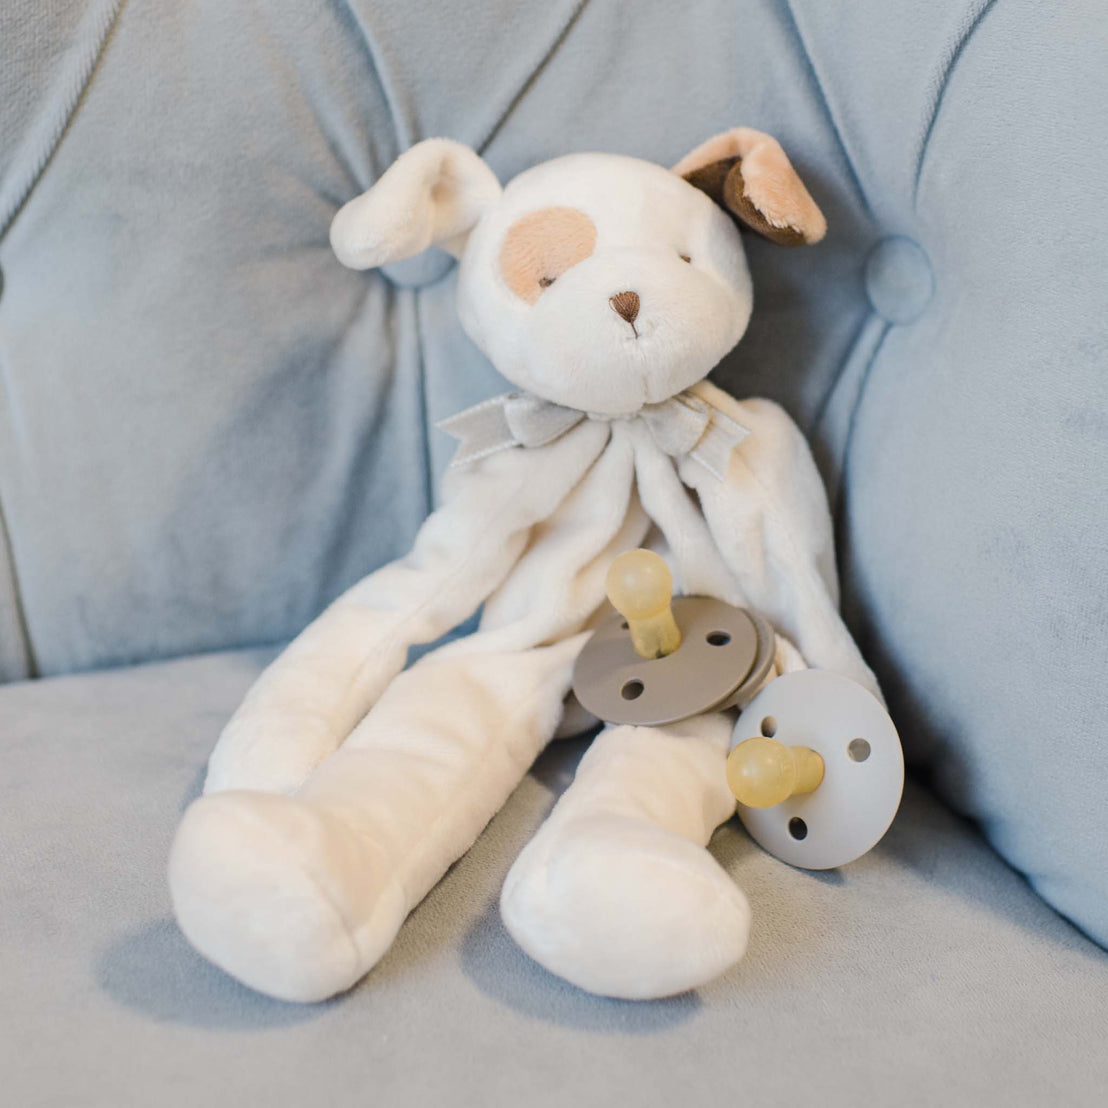 The Ezra Tan Silly Puppy Buddy stuffed animal sitting on a couch. This stuffed animal serves as a pacifier holder